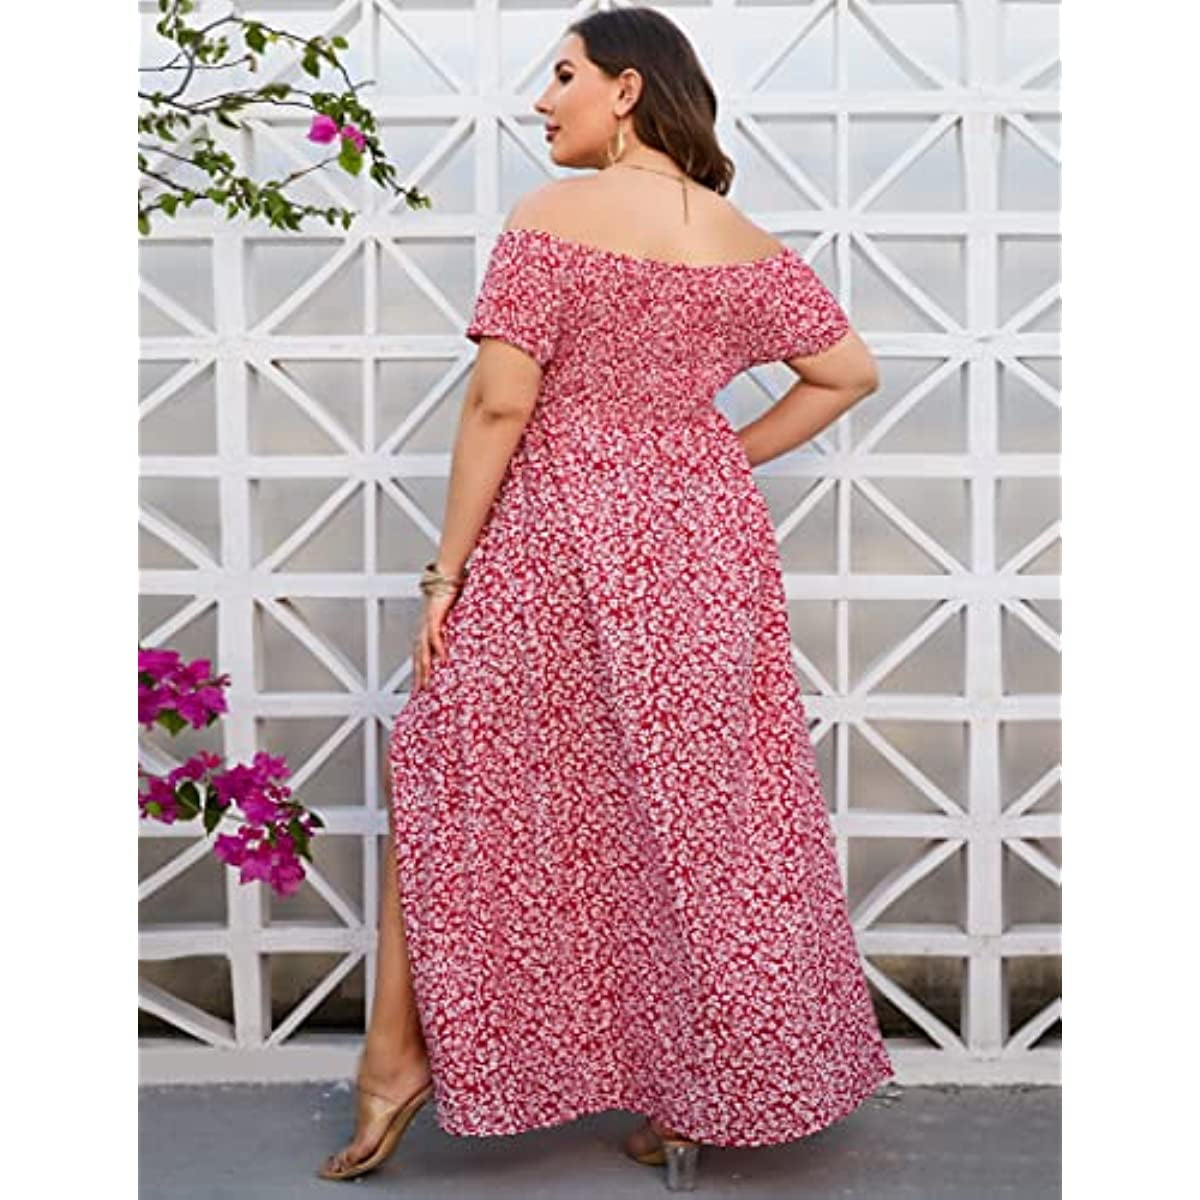 Womens Floral Dresses | Maxi, Midi & Mini Options Available – Style Cheat